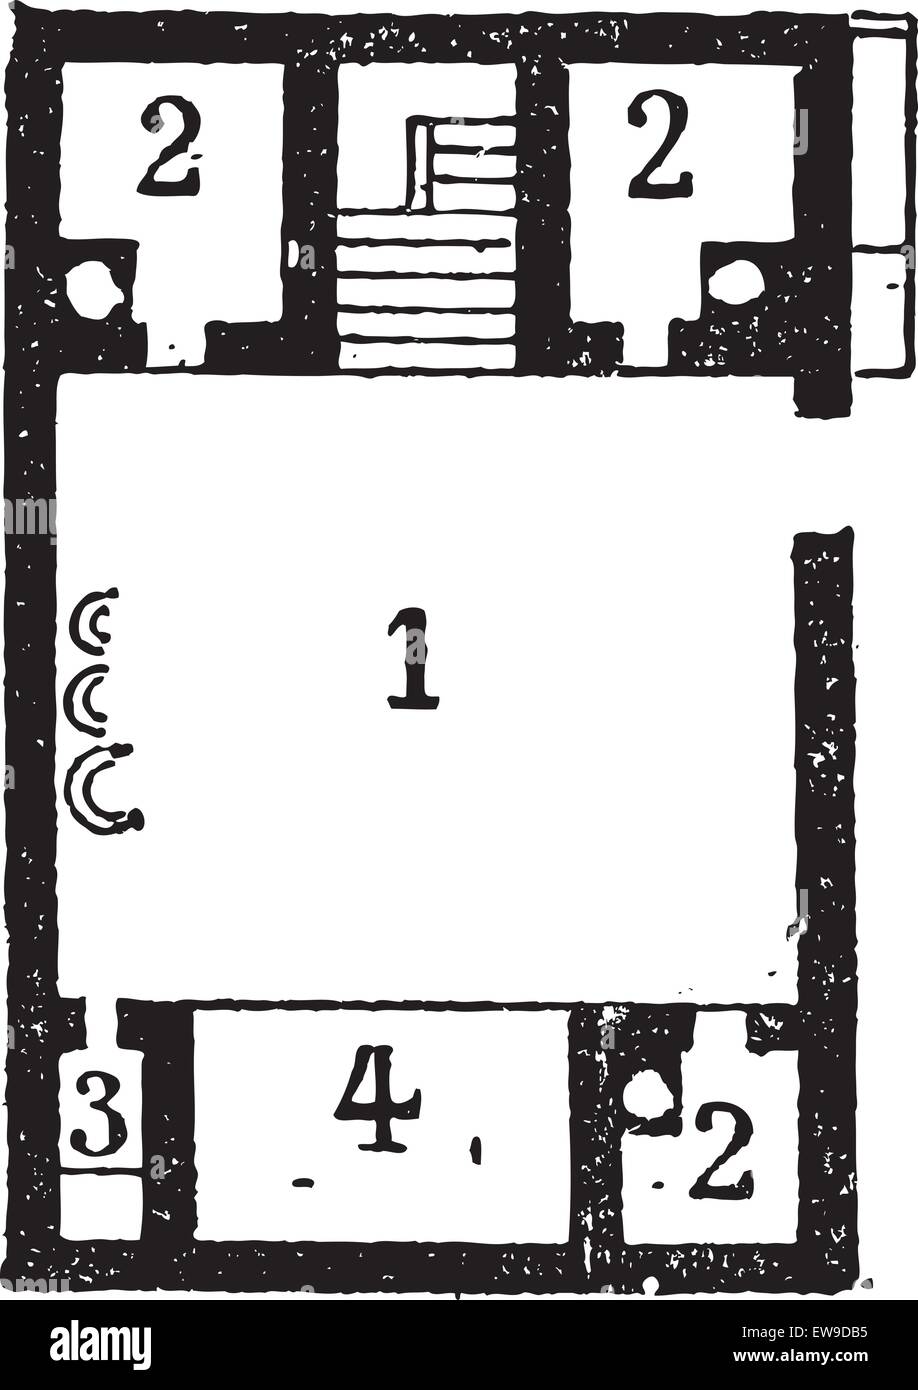 floor plan of an egyptian house, showing 1 courtyard, 2